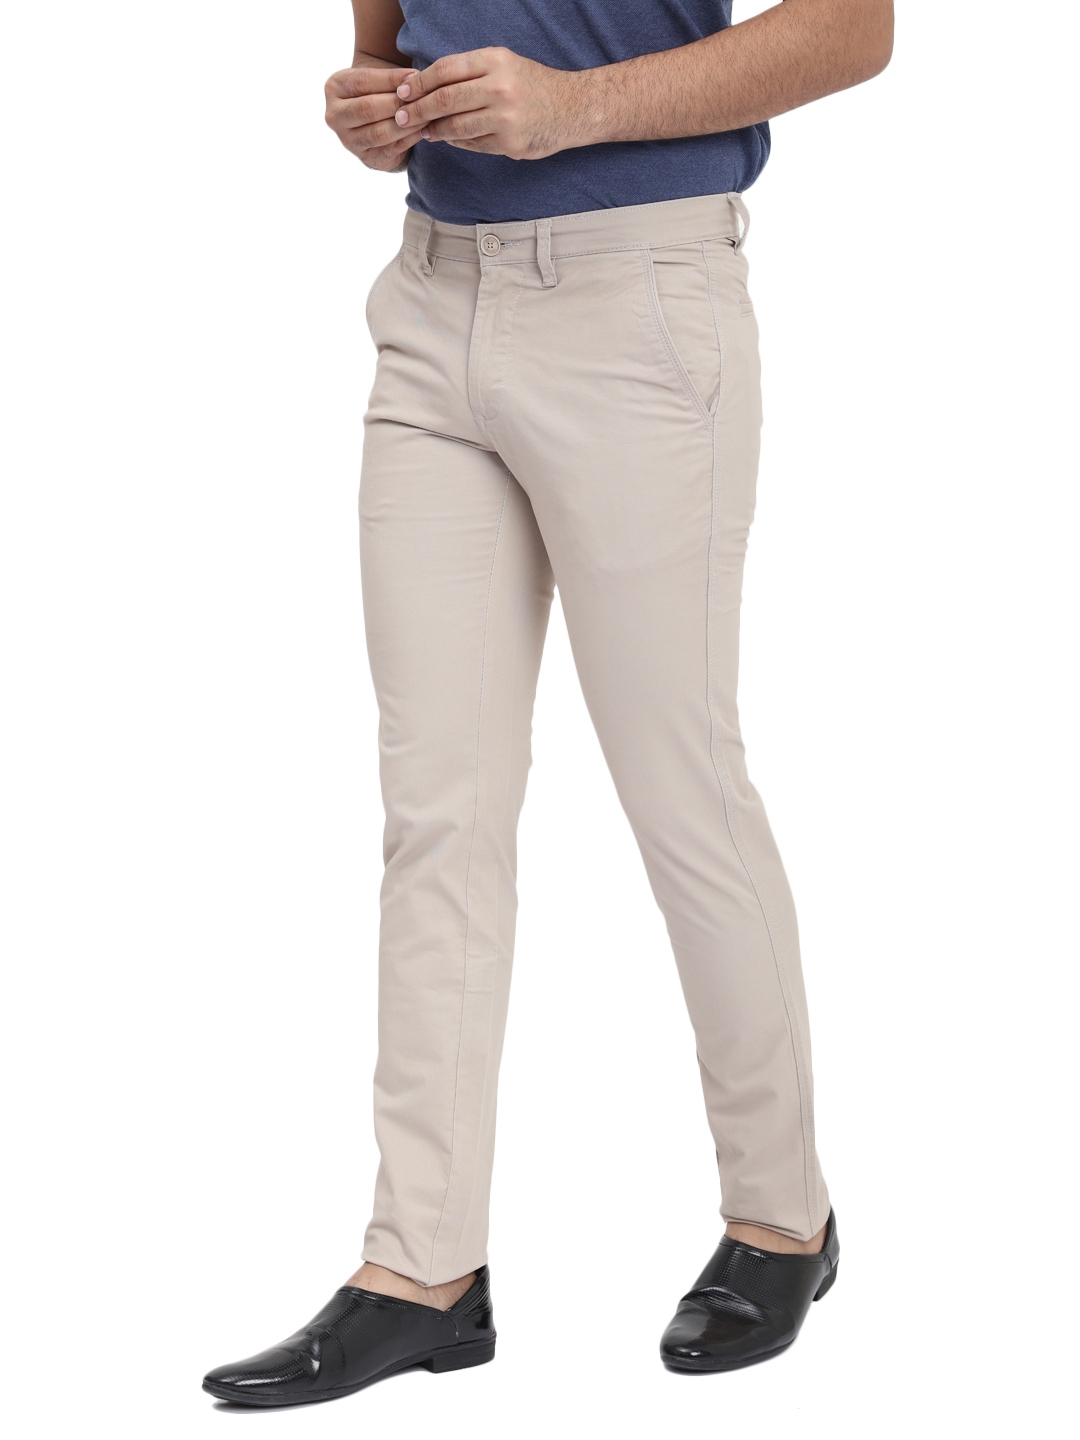 Dcot by Donear Mens Beige Cotton Trousers